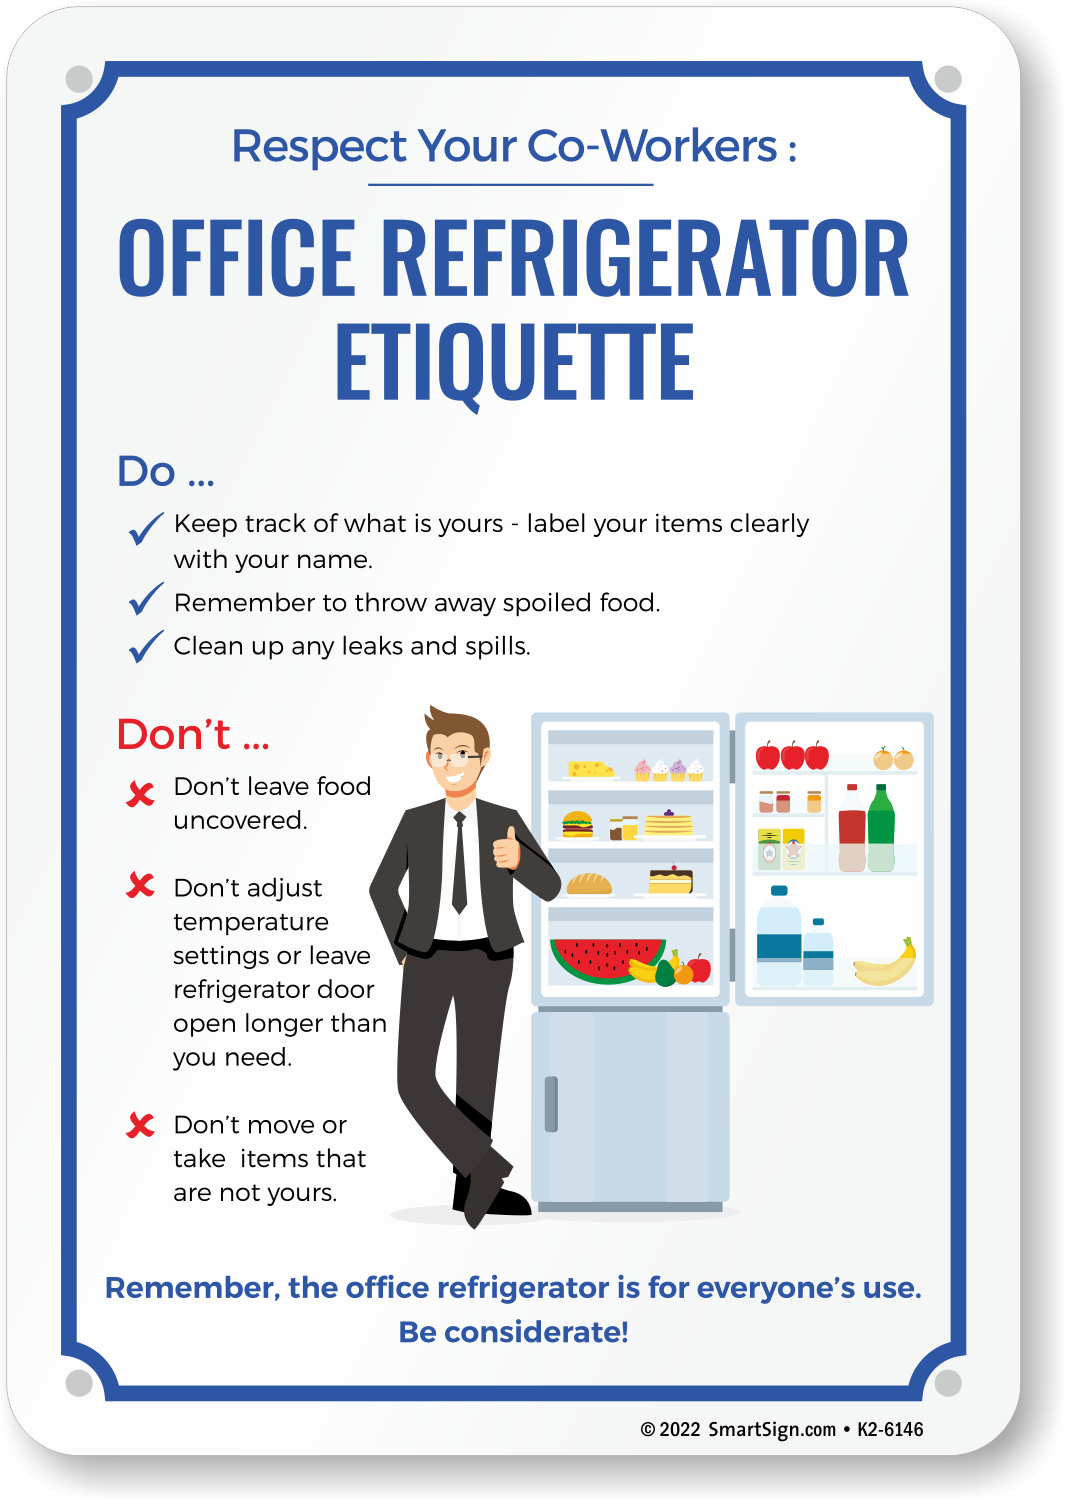 office-refrigerator-etiquette-signs-peacecommission-kdsg-gov-ng